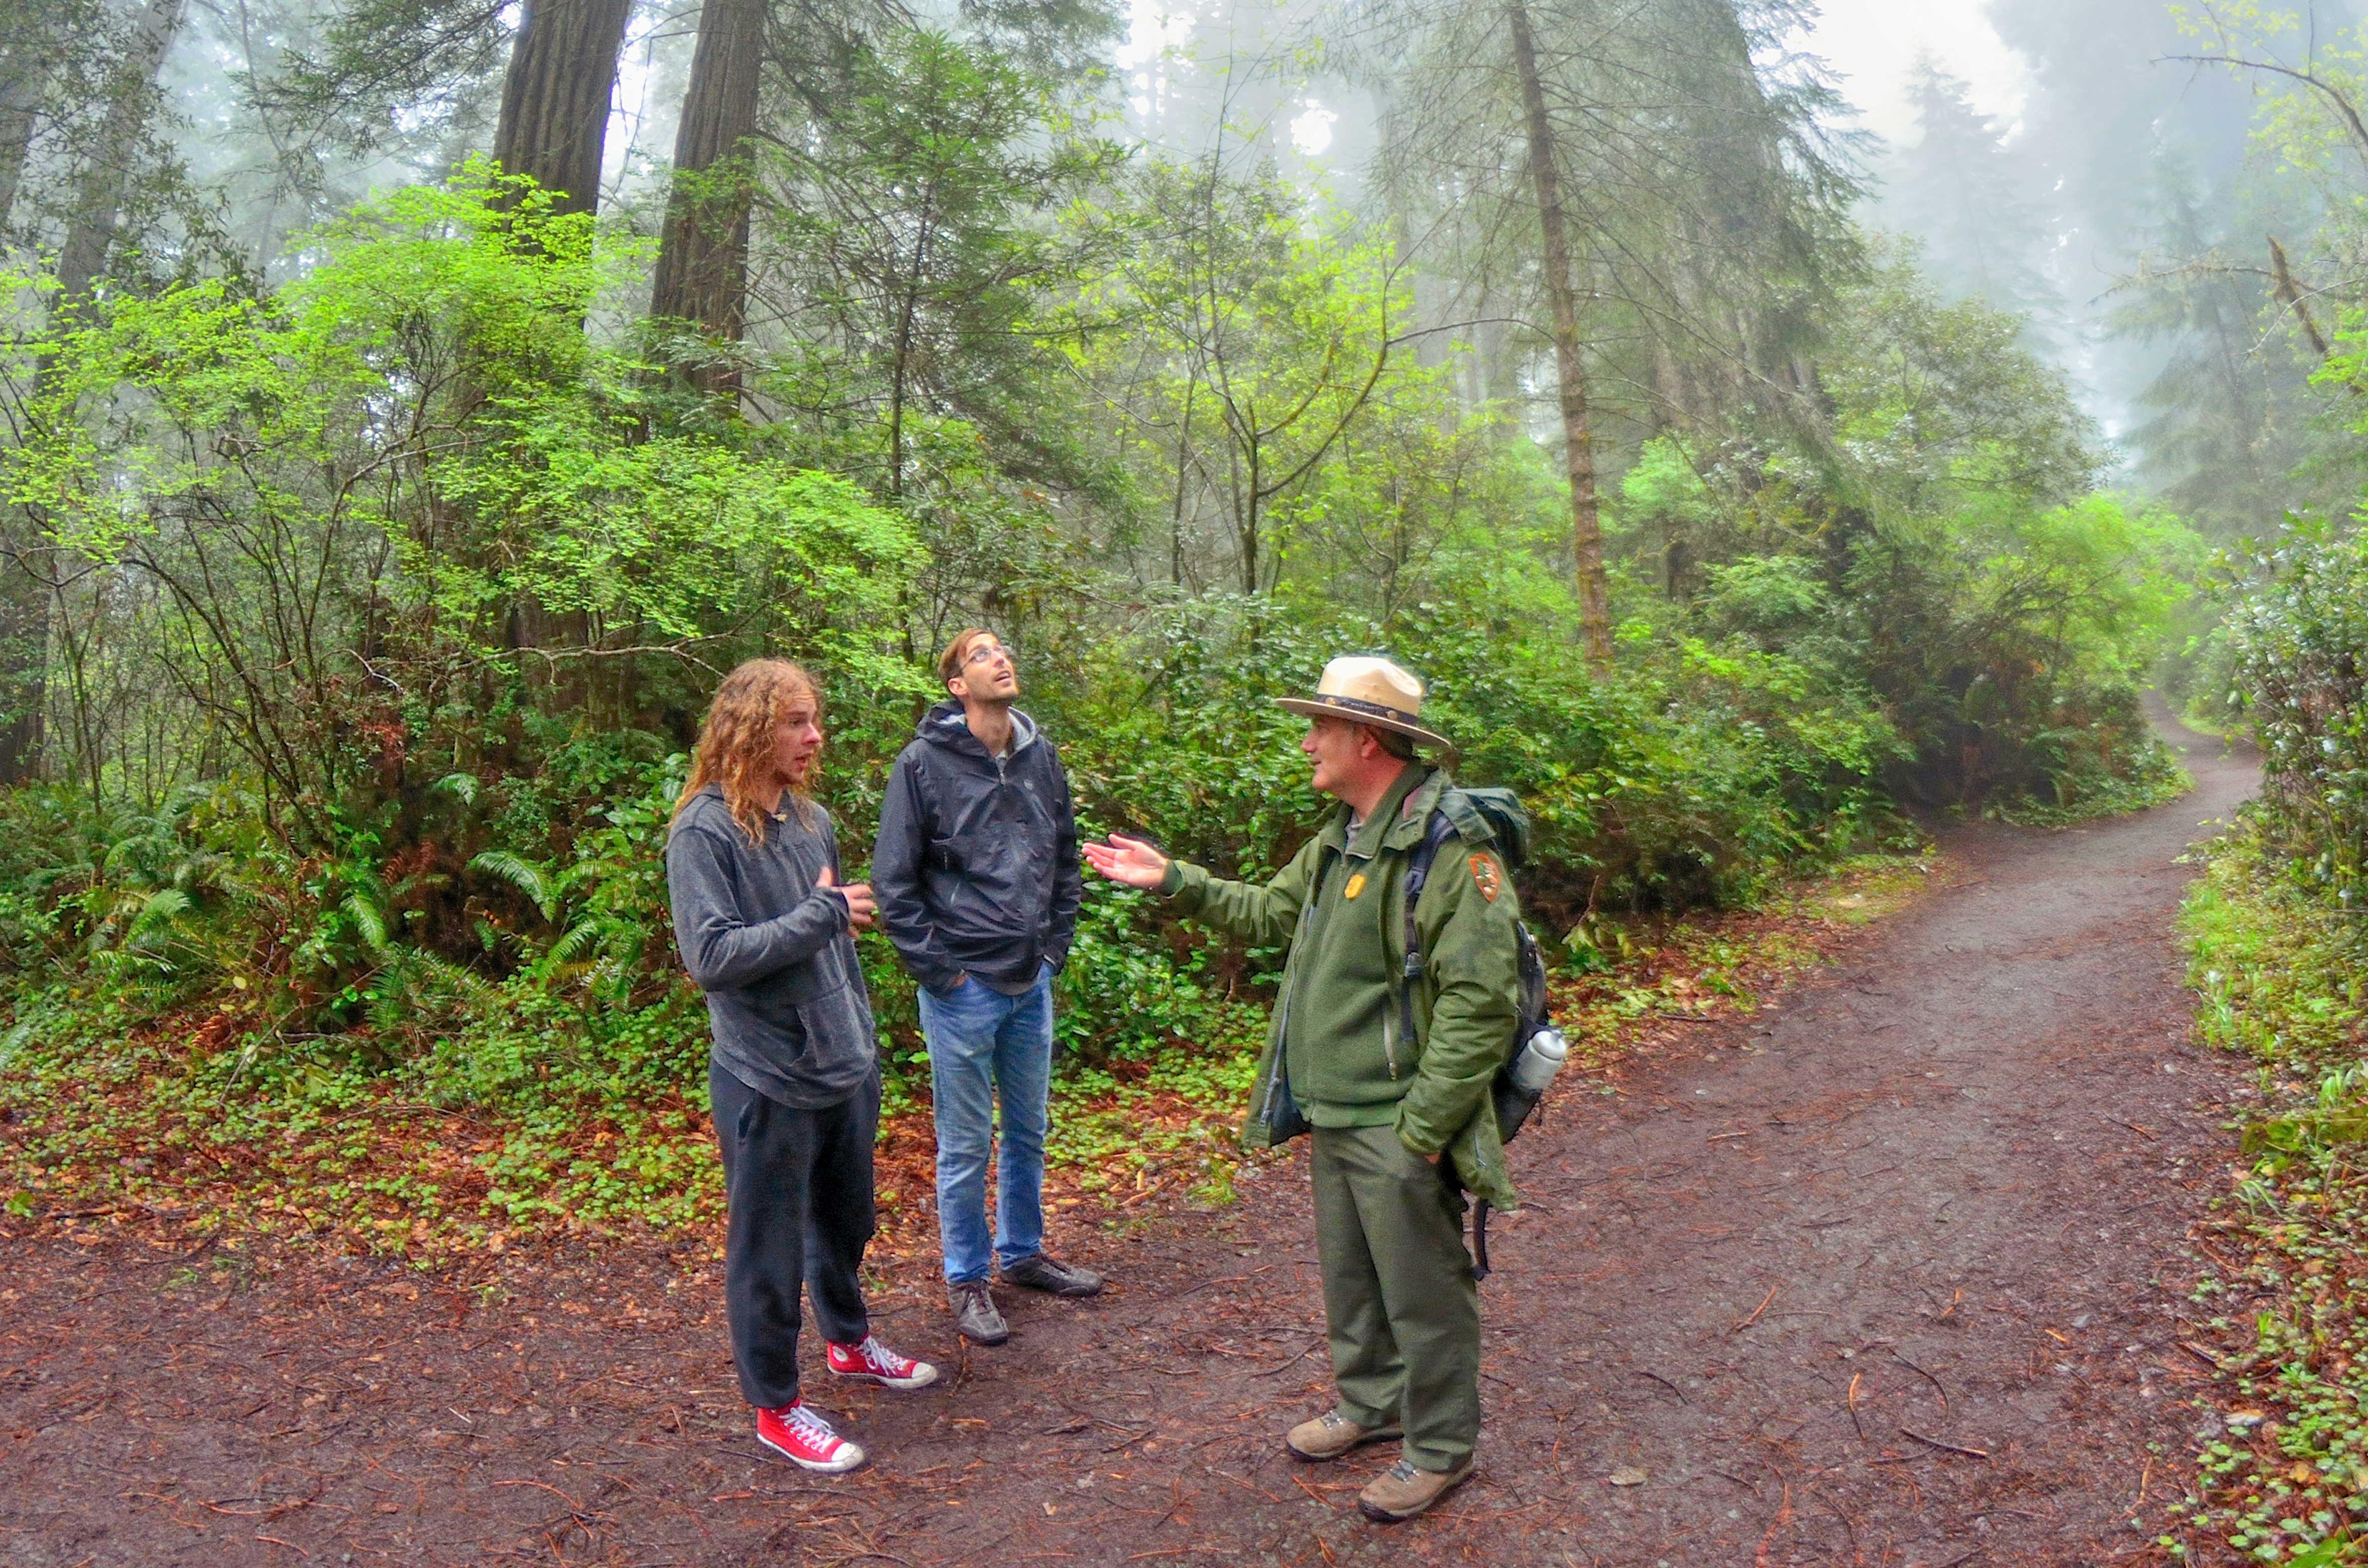 Ranger and Visitors in the Redwoods